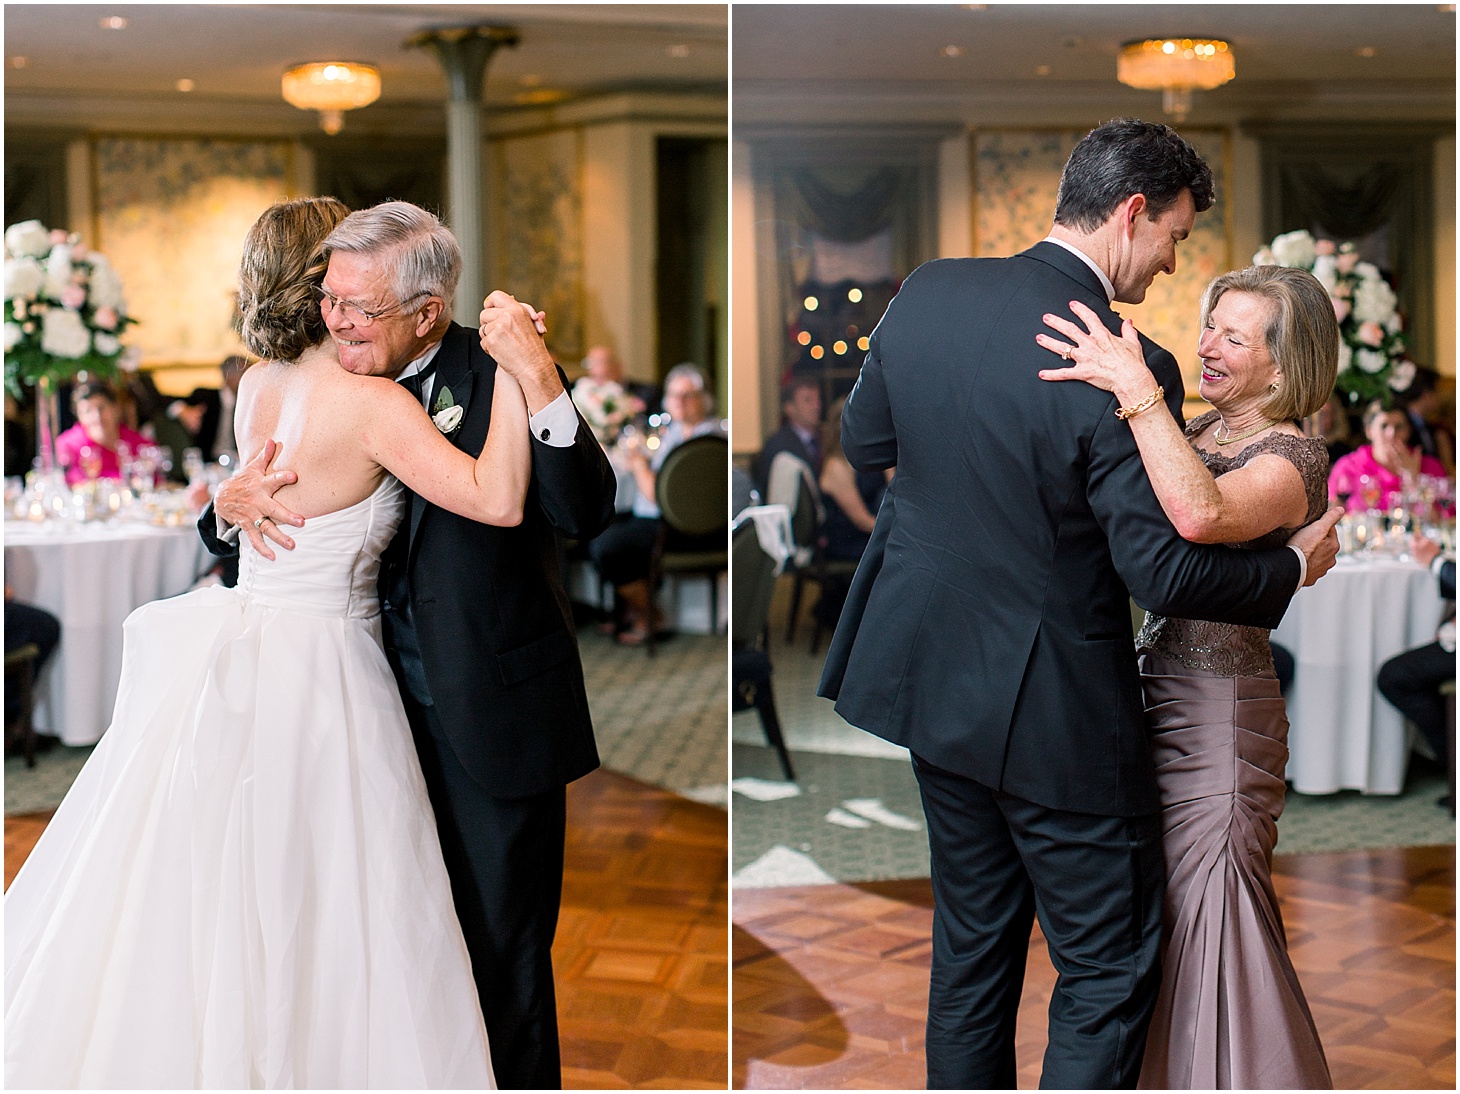 Father-Daughter and Mother- Son Dances | Blush and Black Tie Wedding in Williamsburg, VA | Sarah Bradshaw Photography